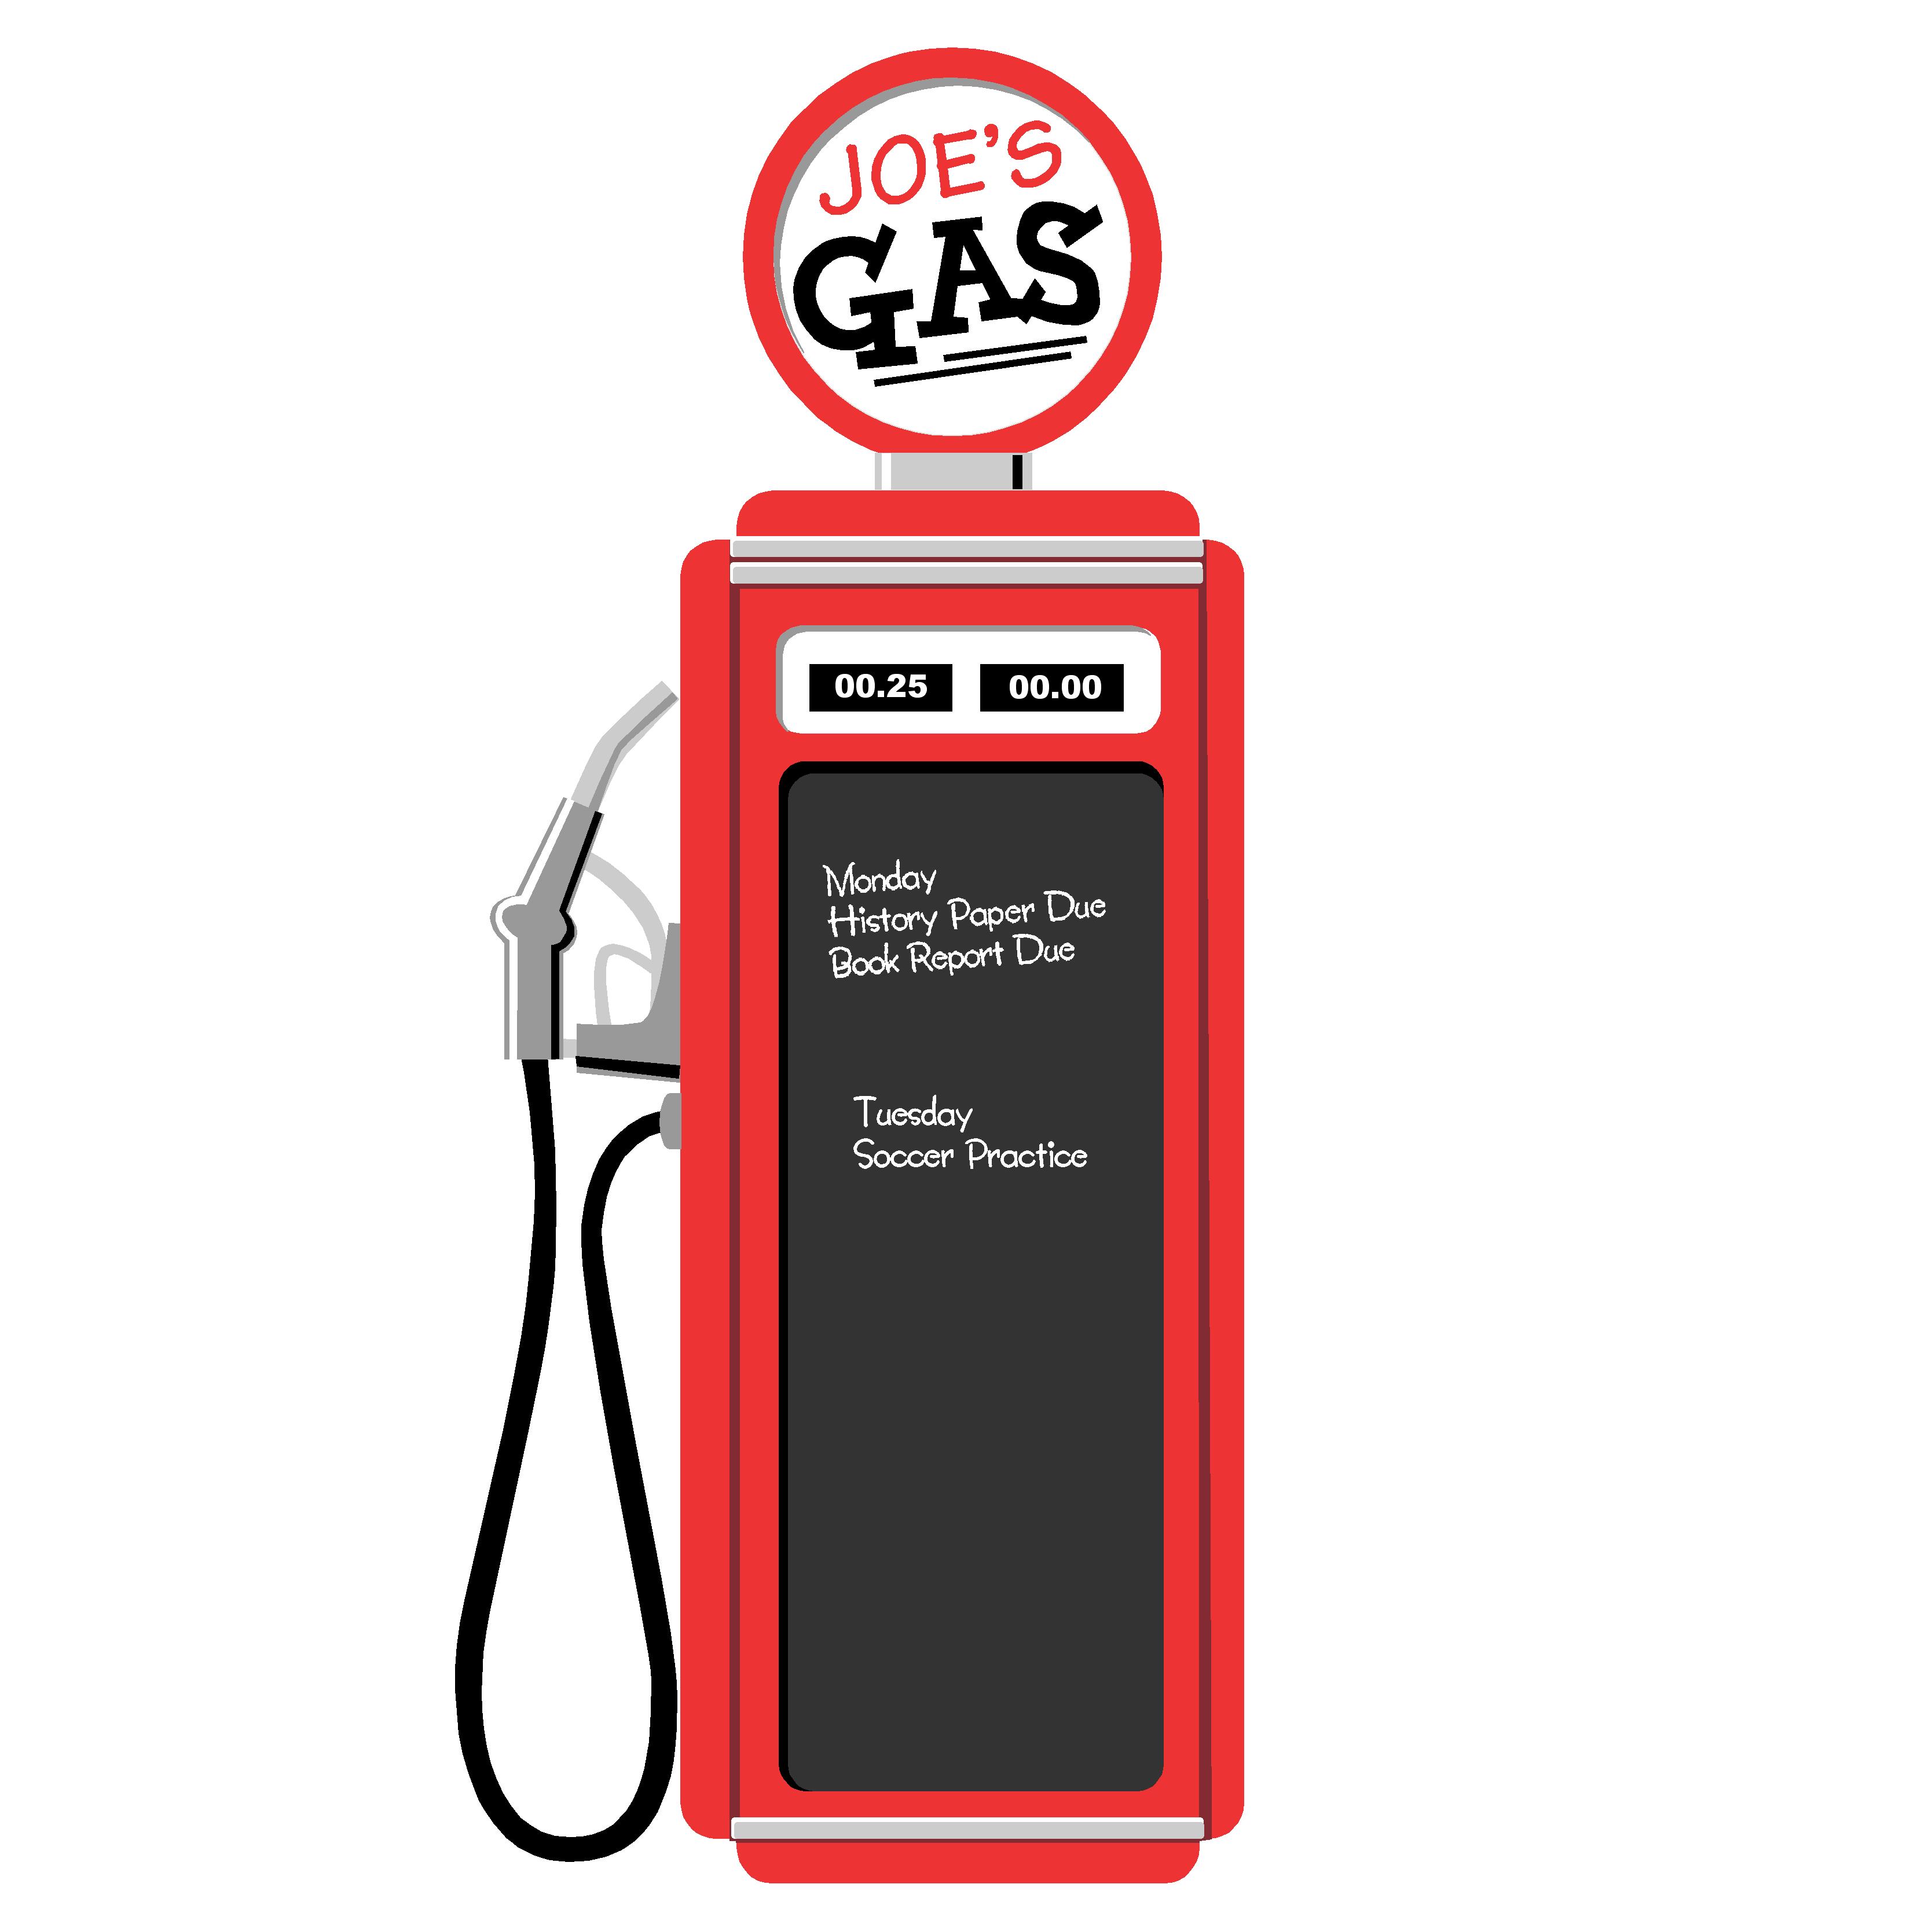 Clip Arts Related To : Gas Pump Gas Pump Png. 